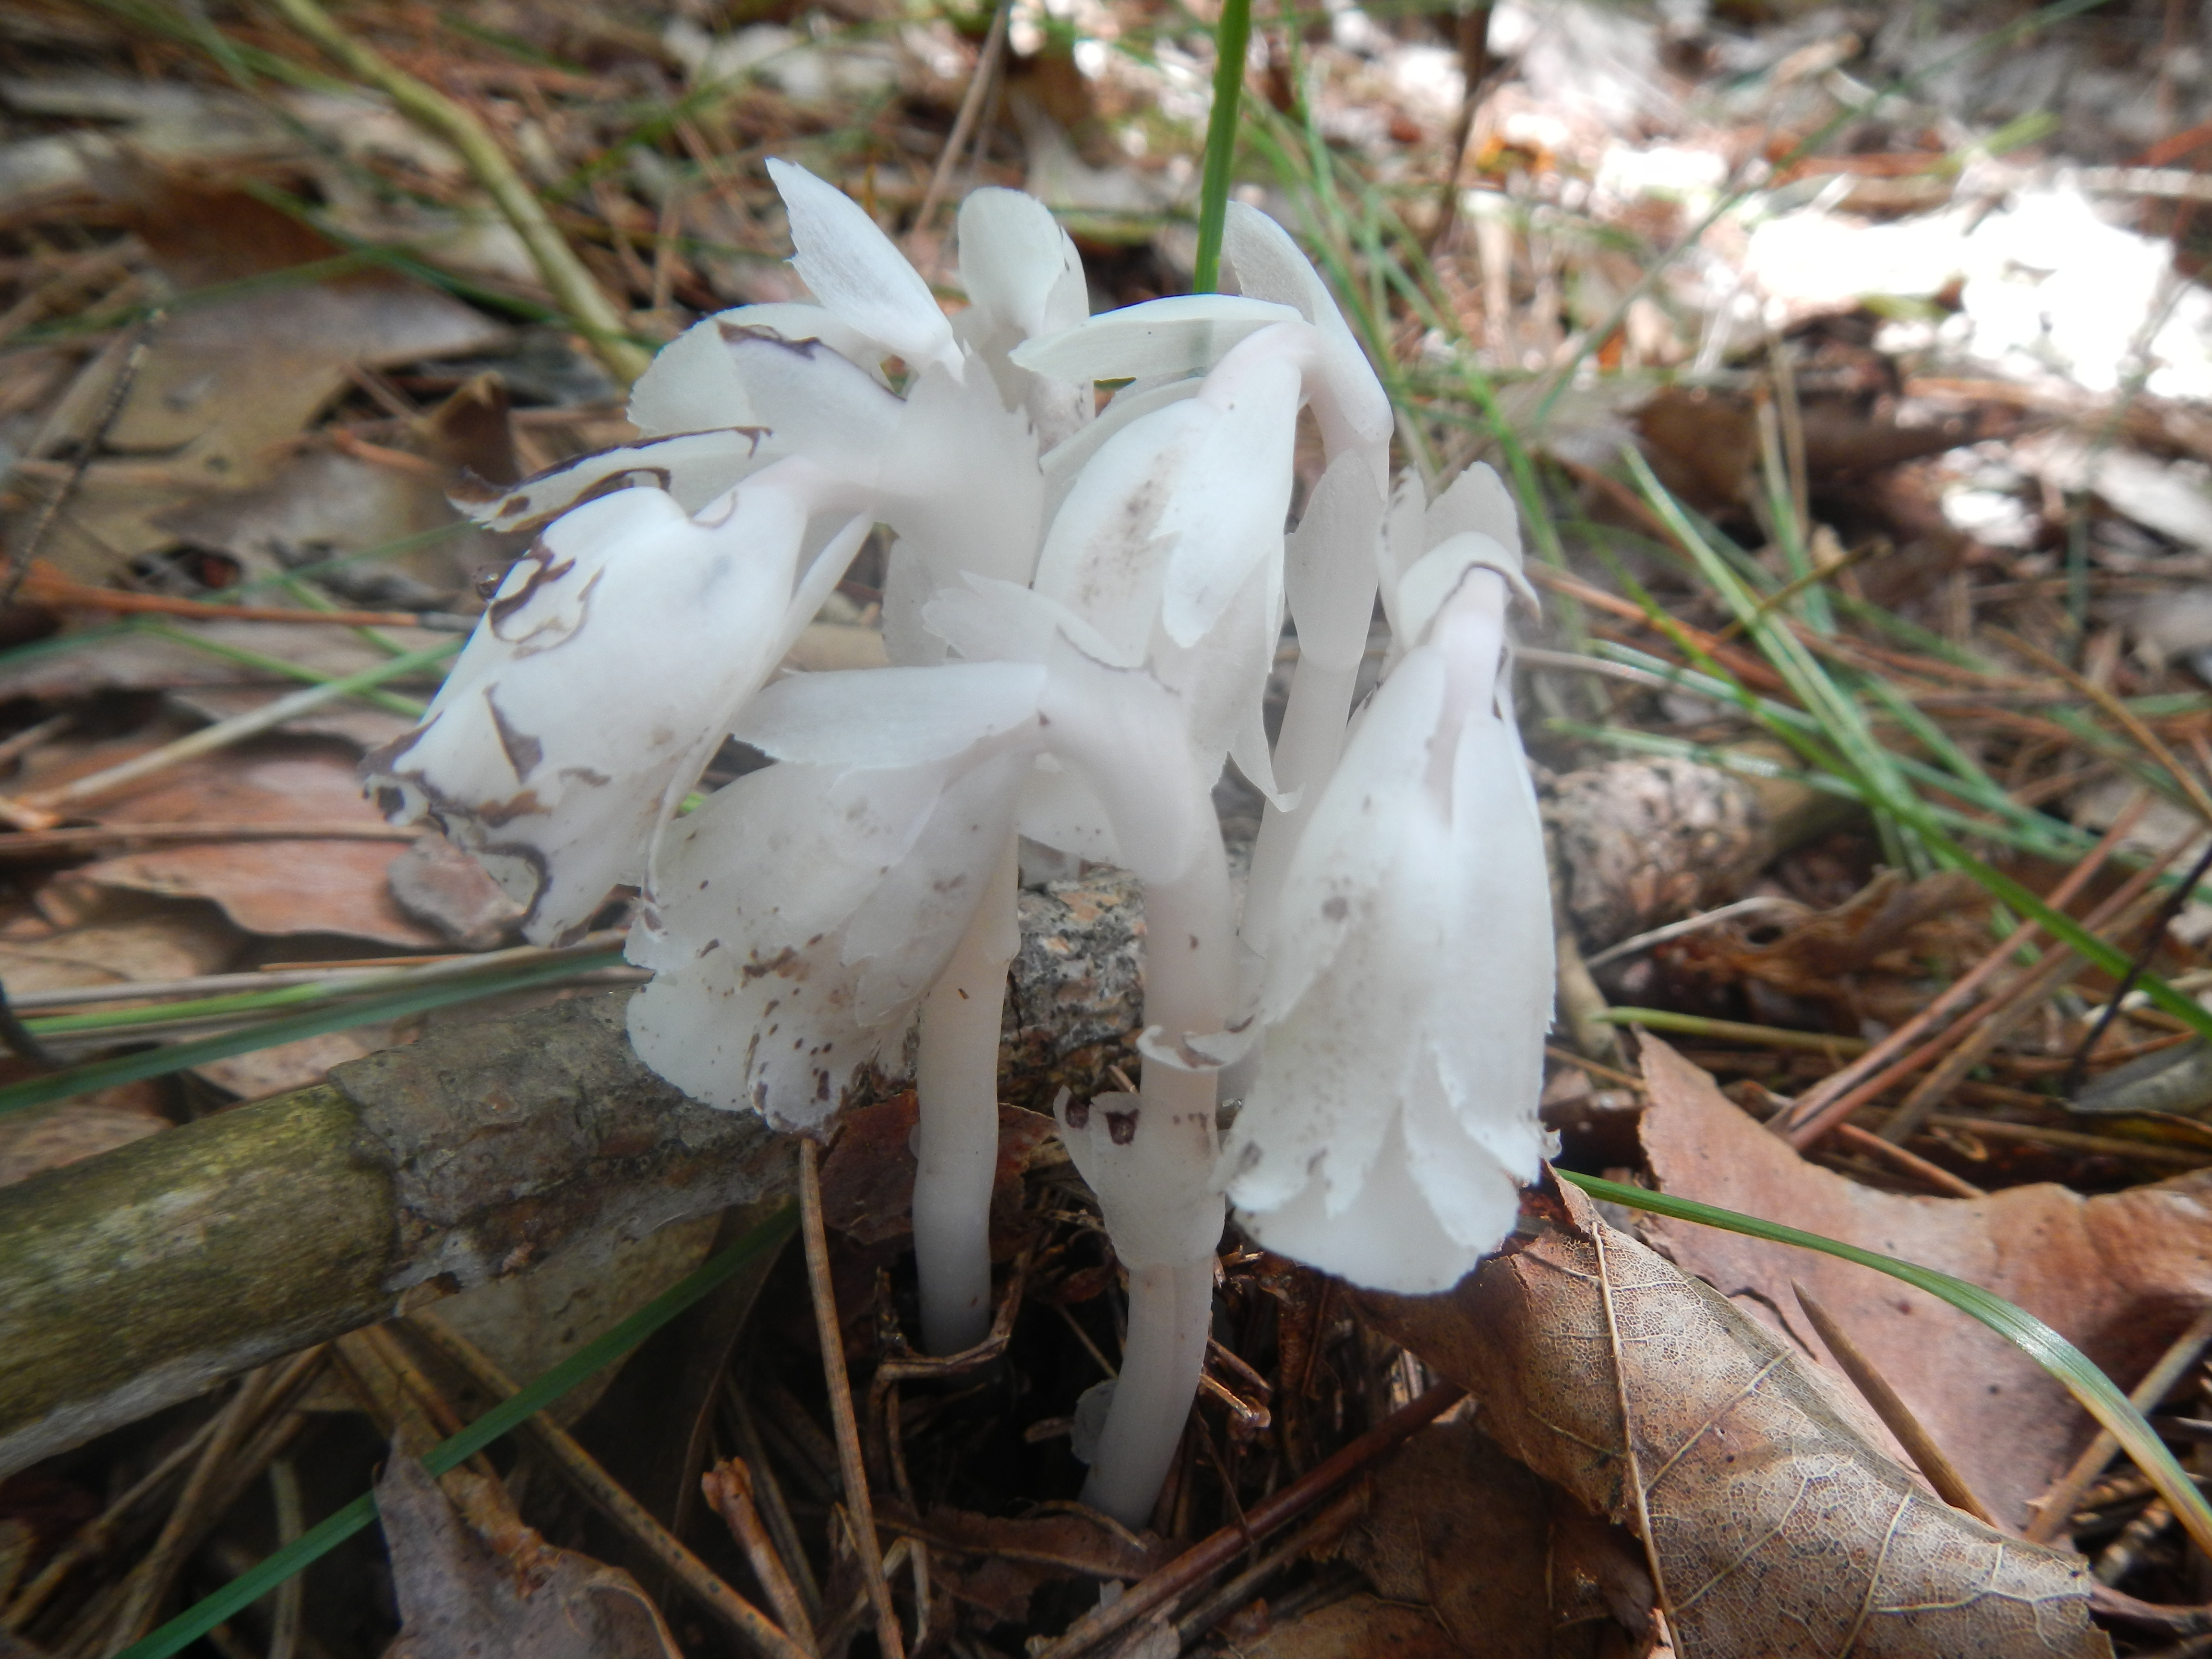 Indian-pipe, Monotropa uniflora - this is a non-photosynthetic plant that gets its nutrition from a fungus associated with it's roots